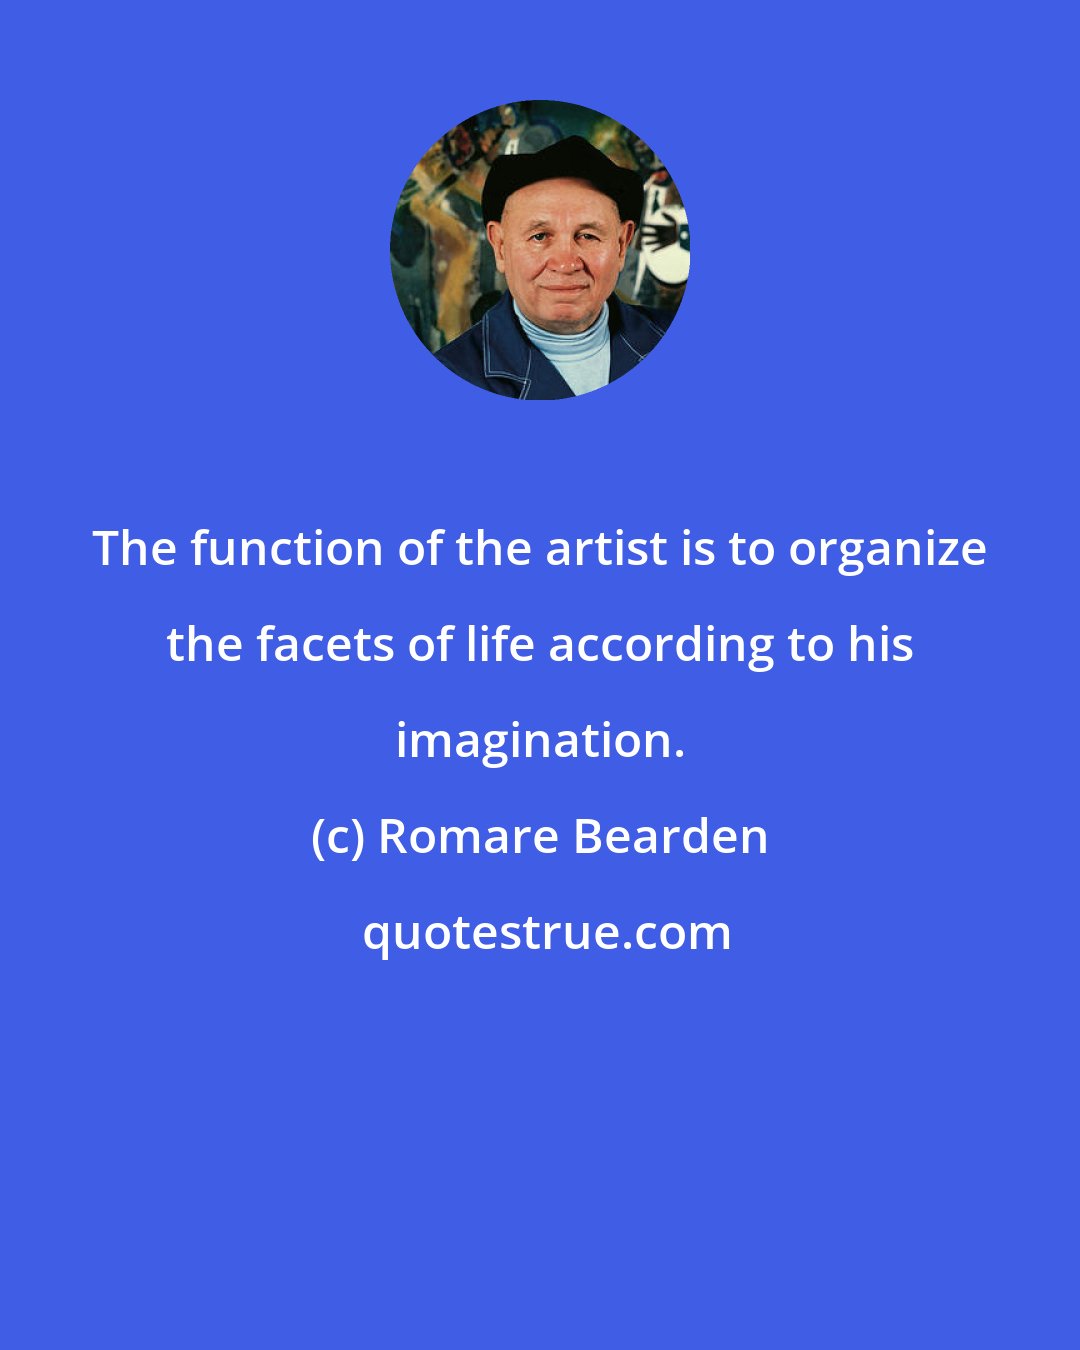 Romare Bearden: The function of the artist is to organize the facets of life according to his imagination.